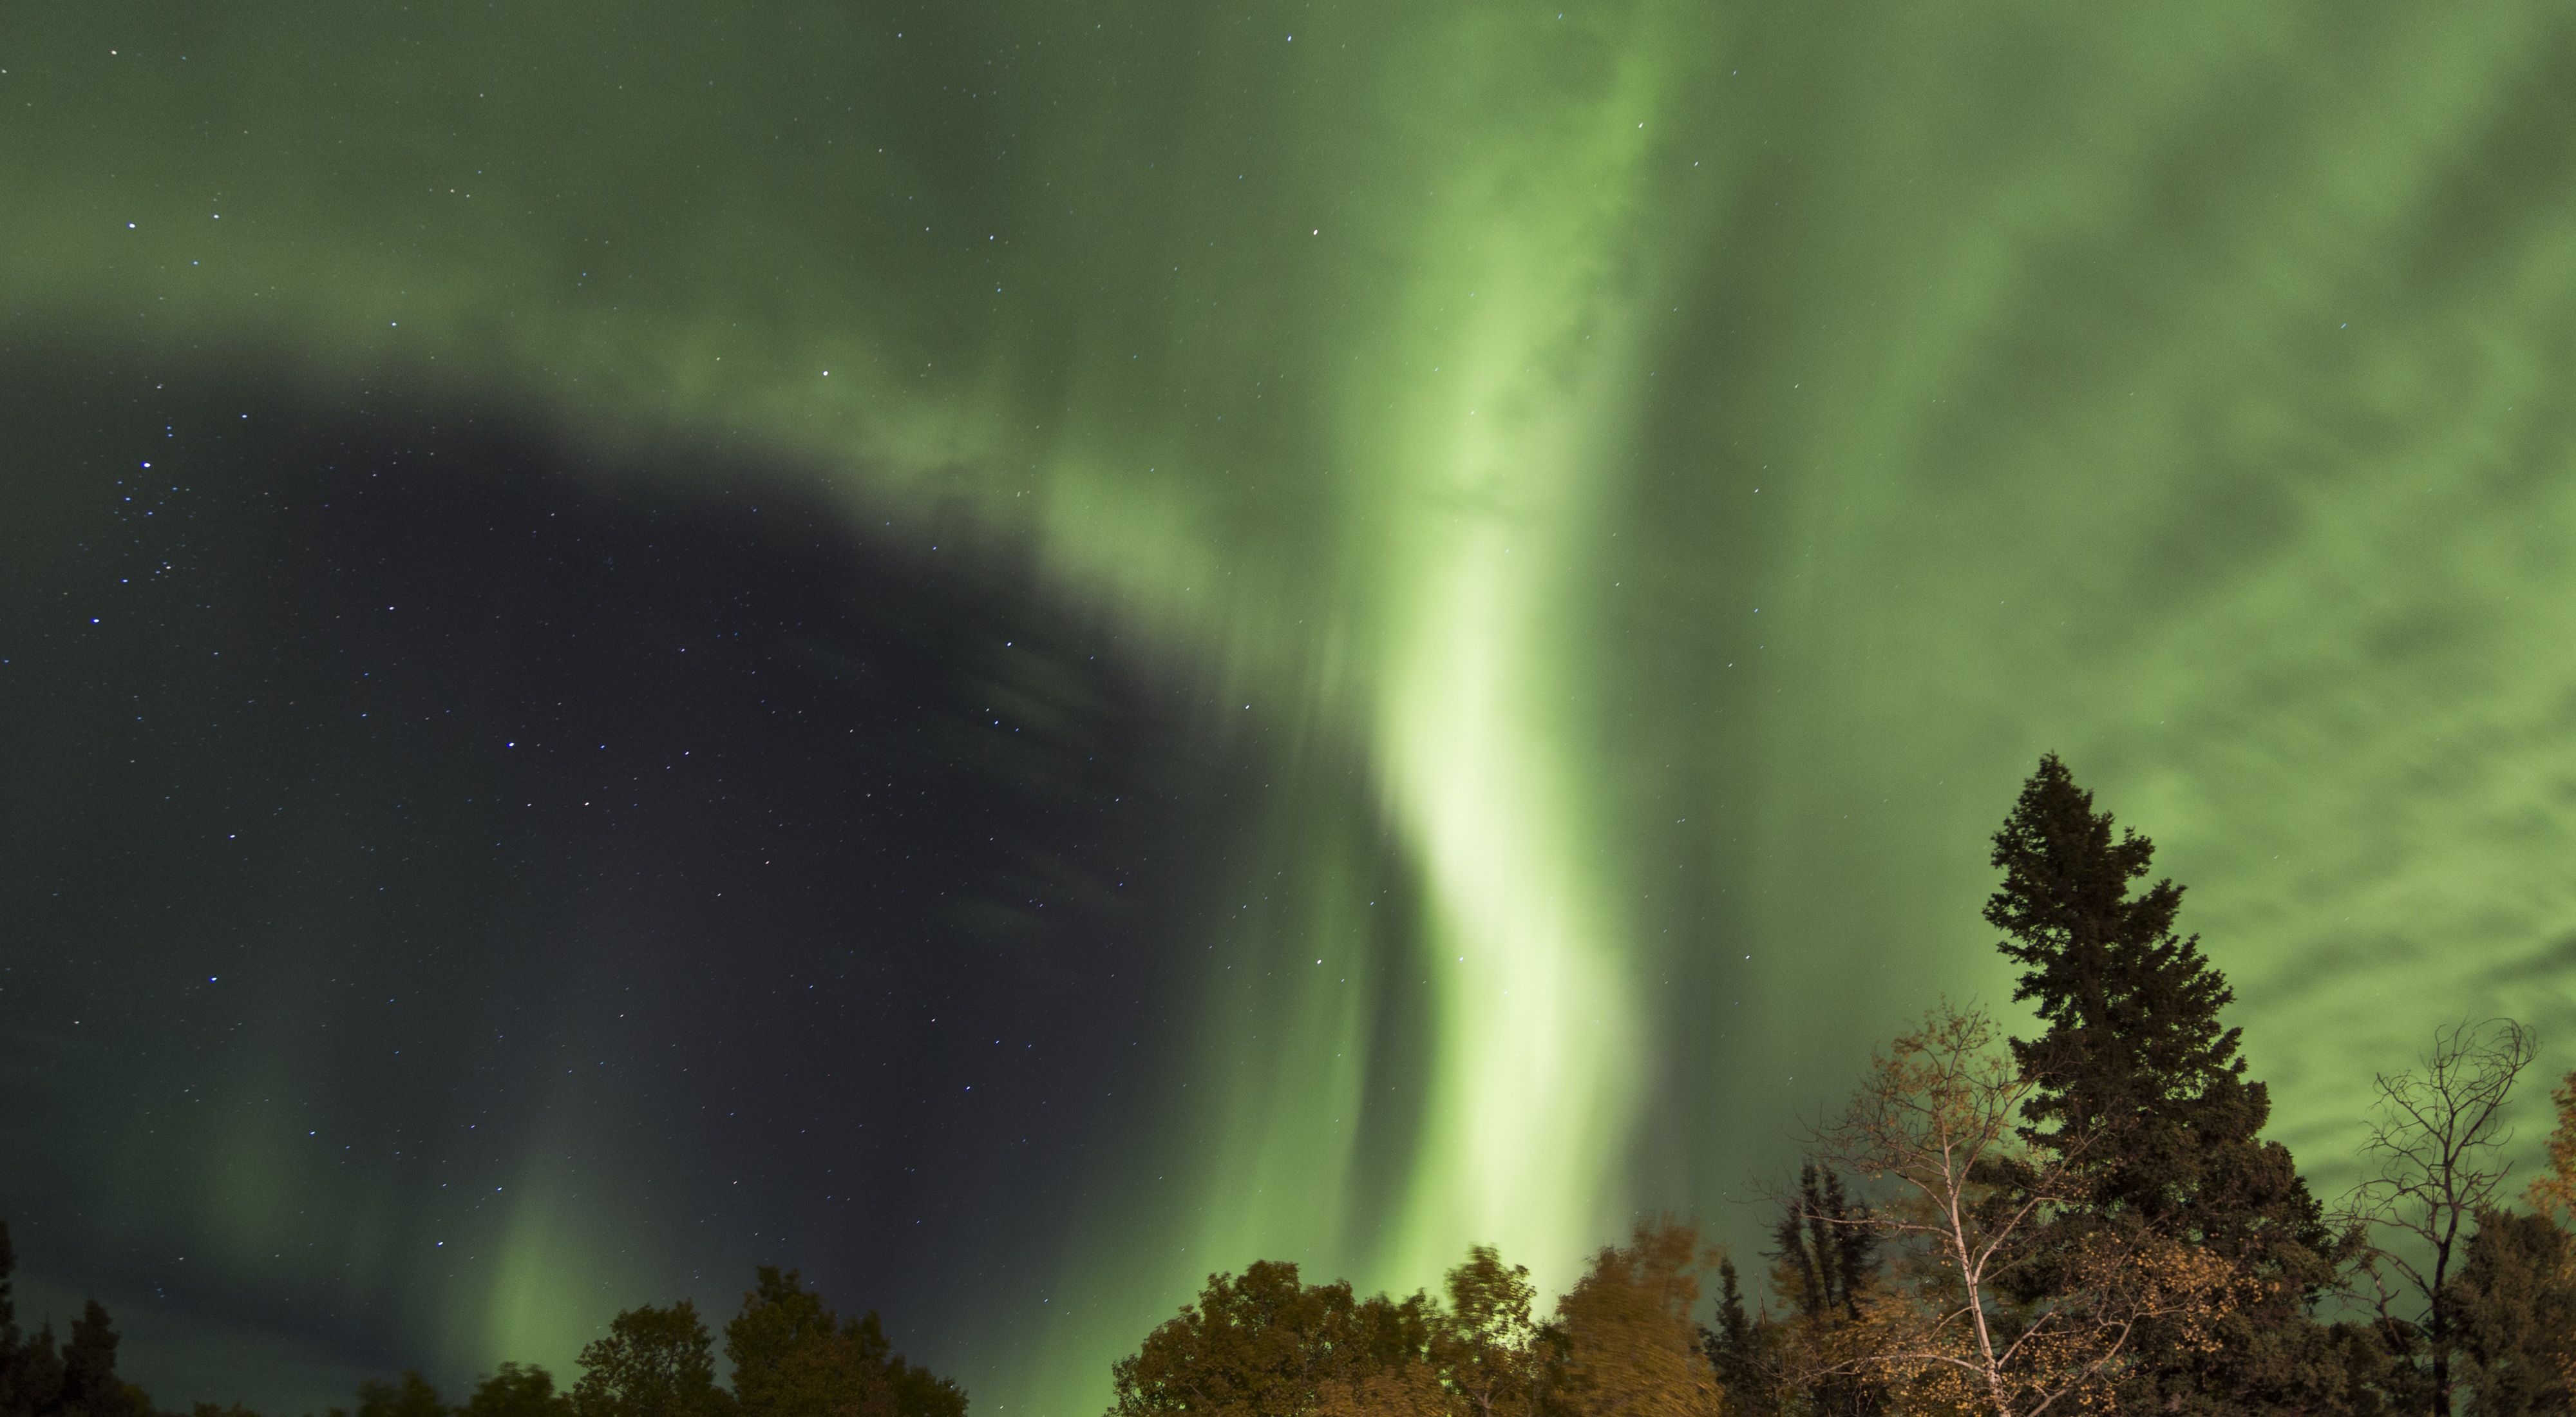 In northern Manitoba, the aura borealis shines over the boreal forest.